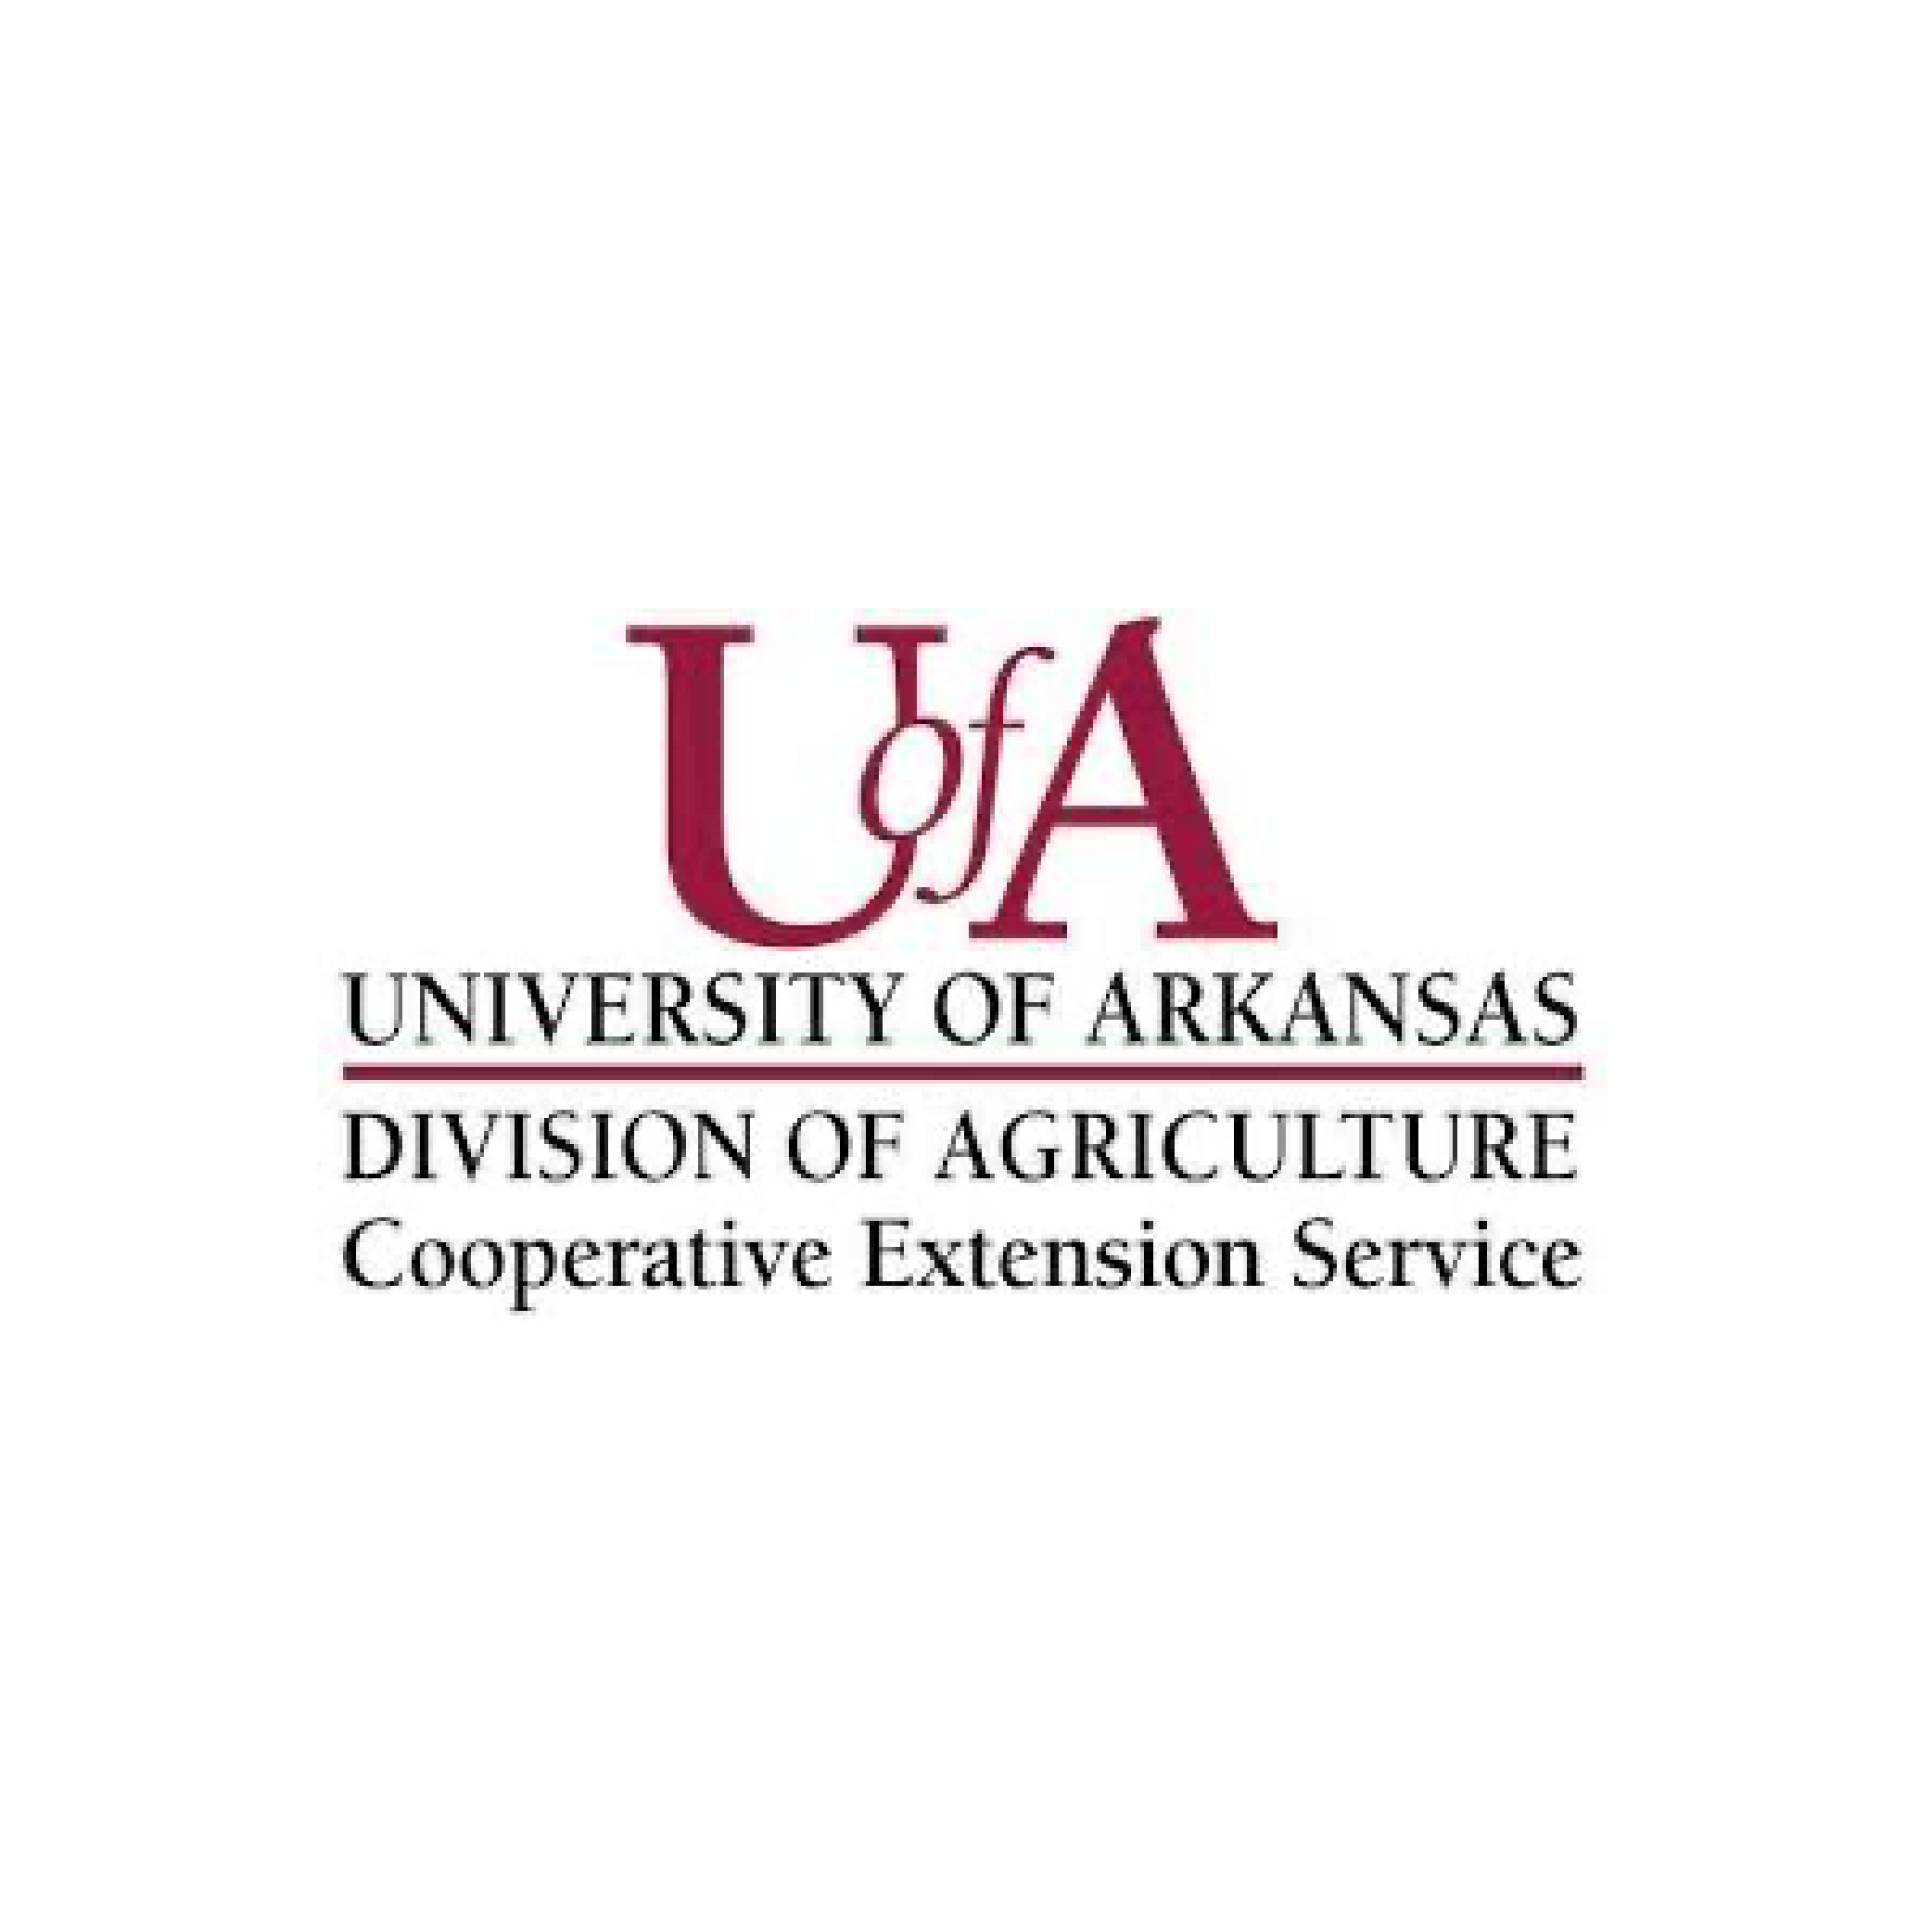 University of Arkansas Division of Agriculture Logo